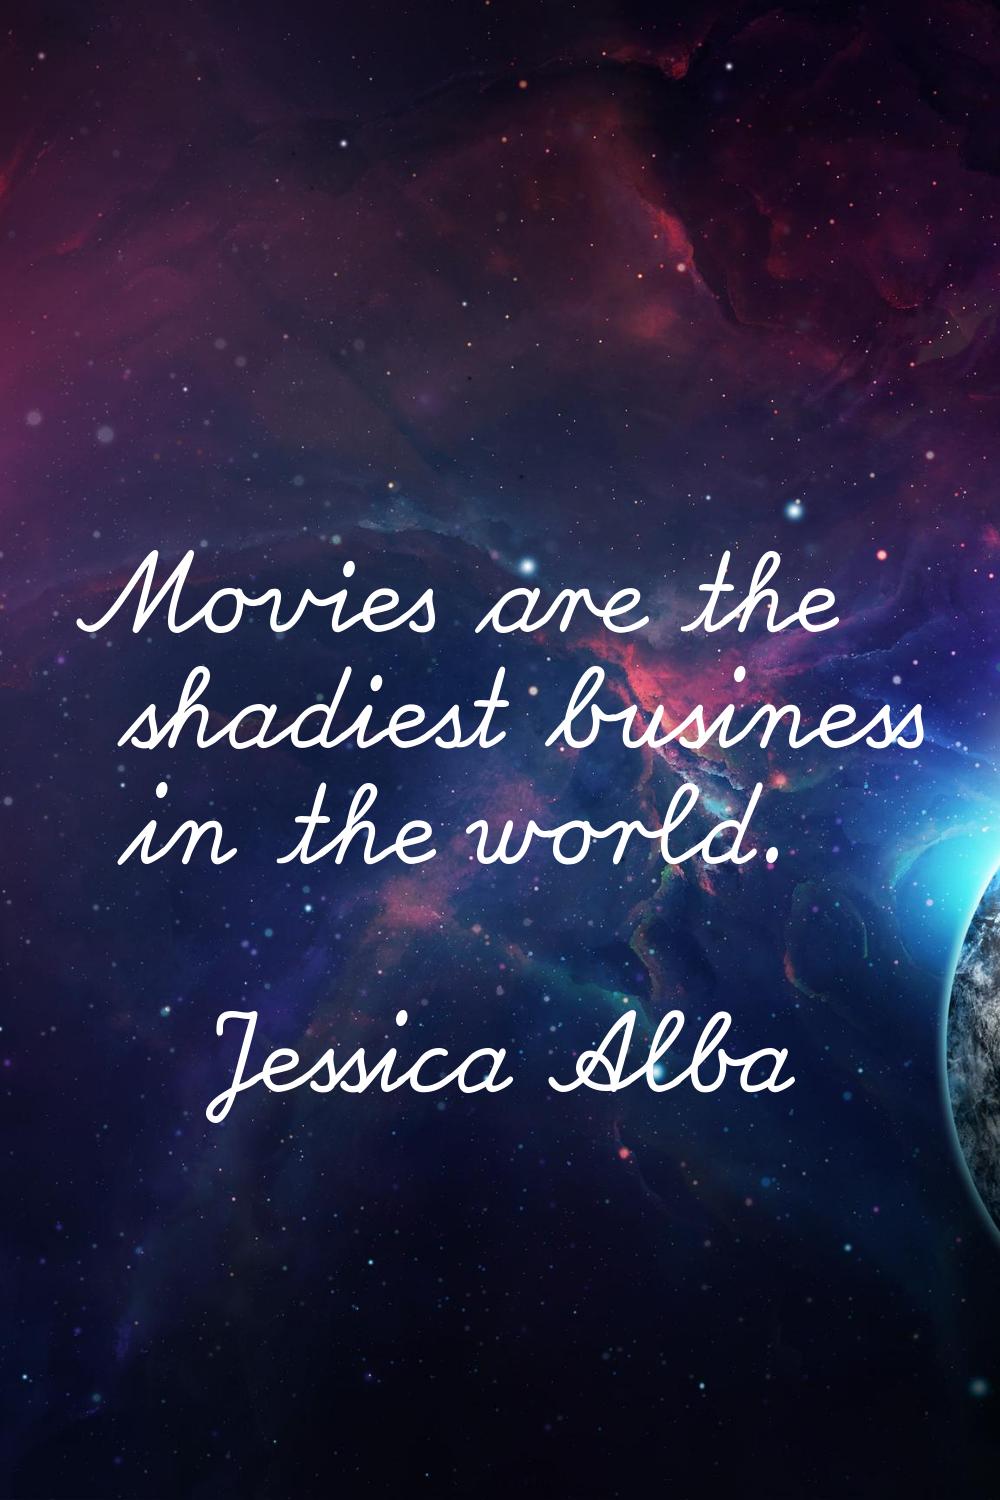 Movies are the shadiest business in the world.